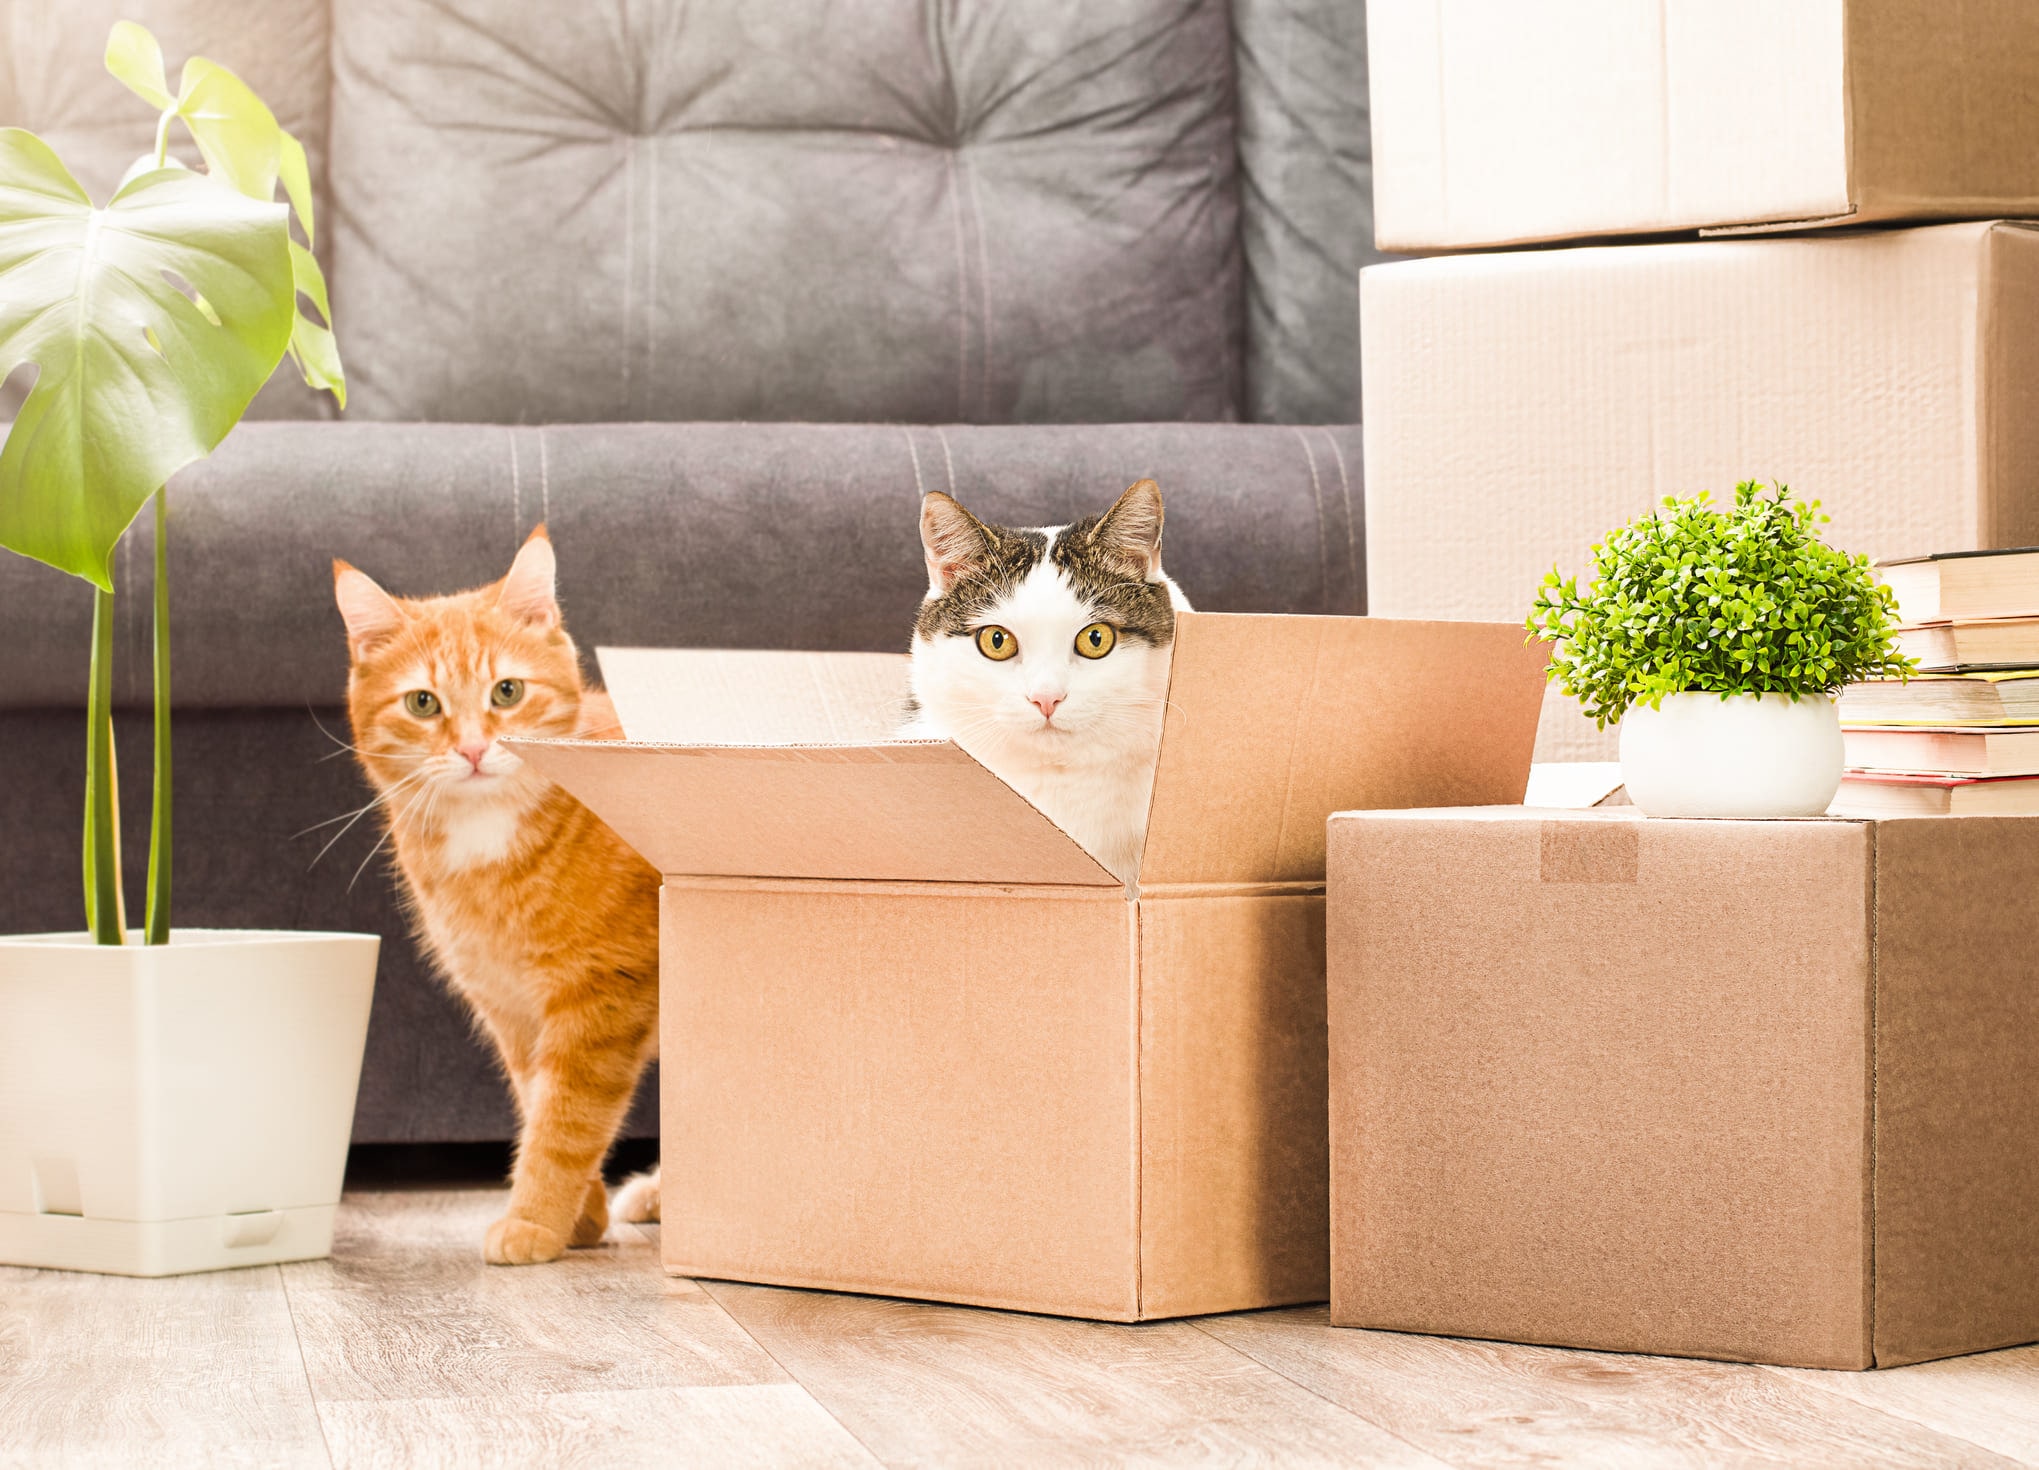 Choosing a Home for Pets